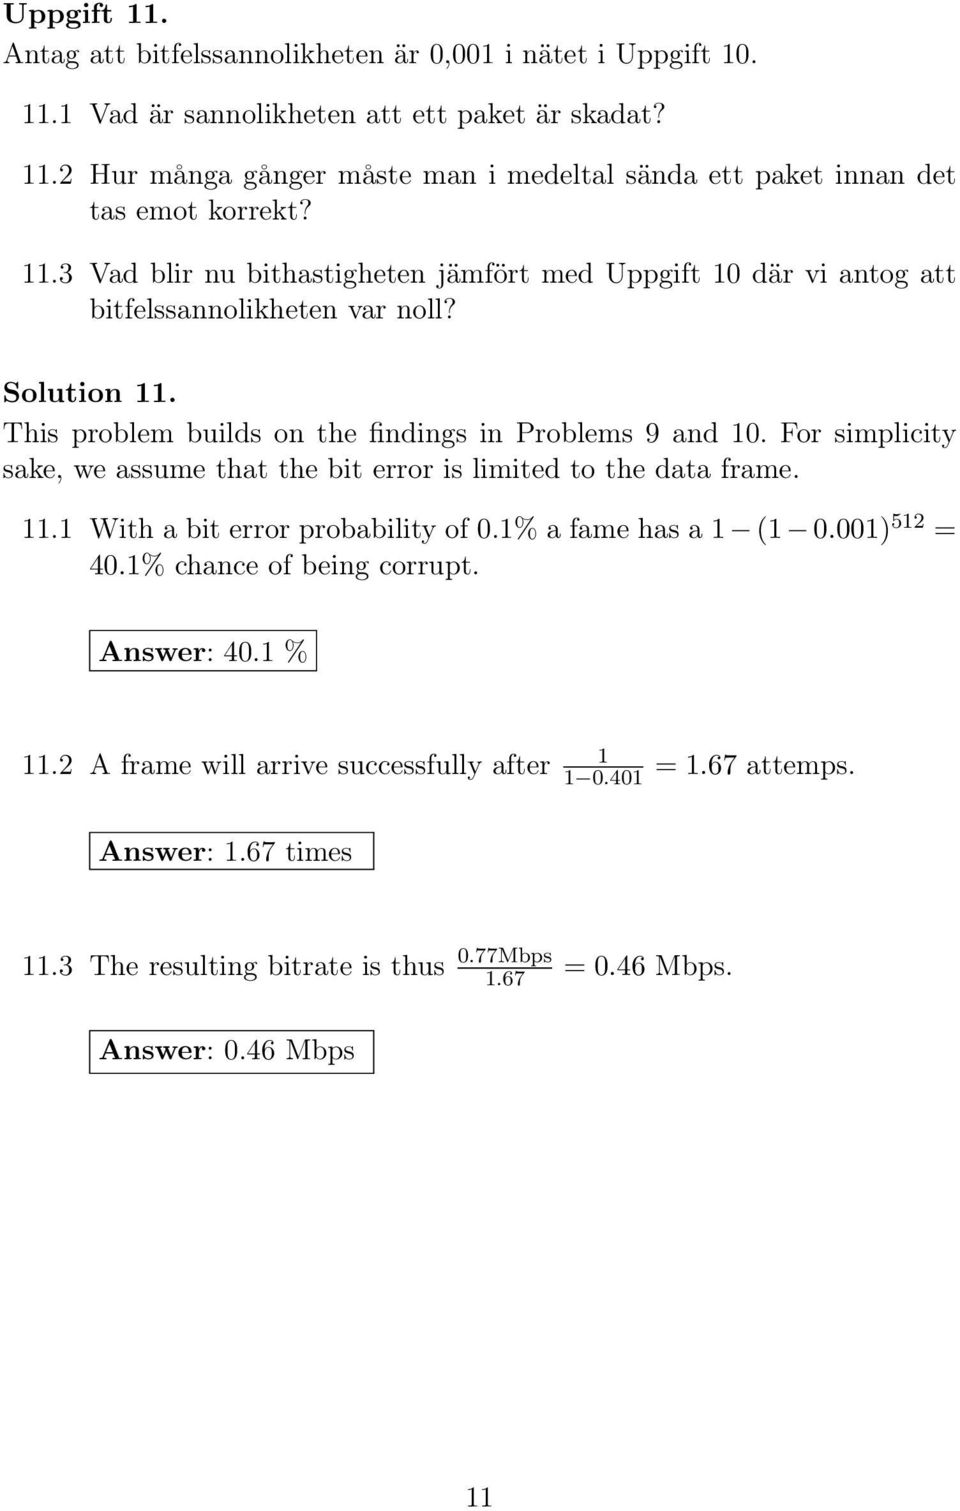 Solution 11. This problem builds on the findings in Problems 9 and 10. For simplicity sake, we assume that the bit error is limited to the data frame. 11.1 With a bit error probability of 0.